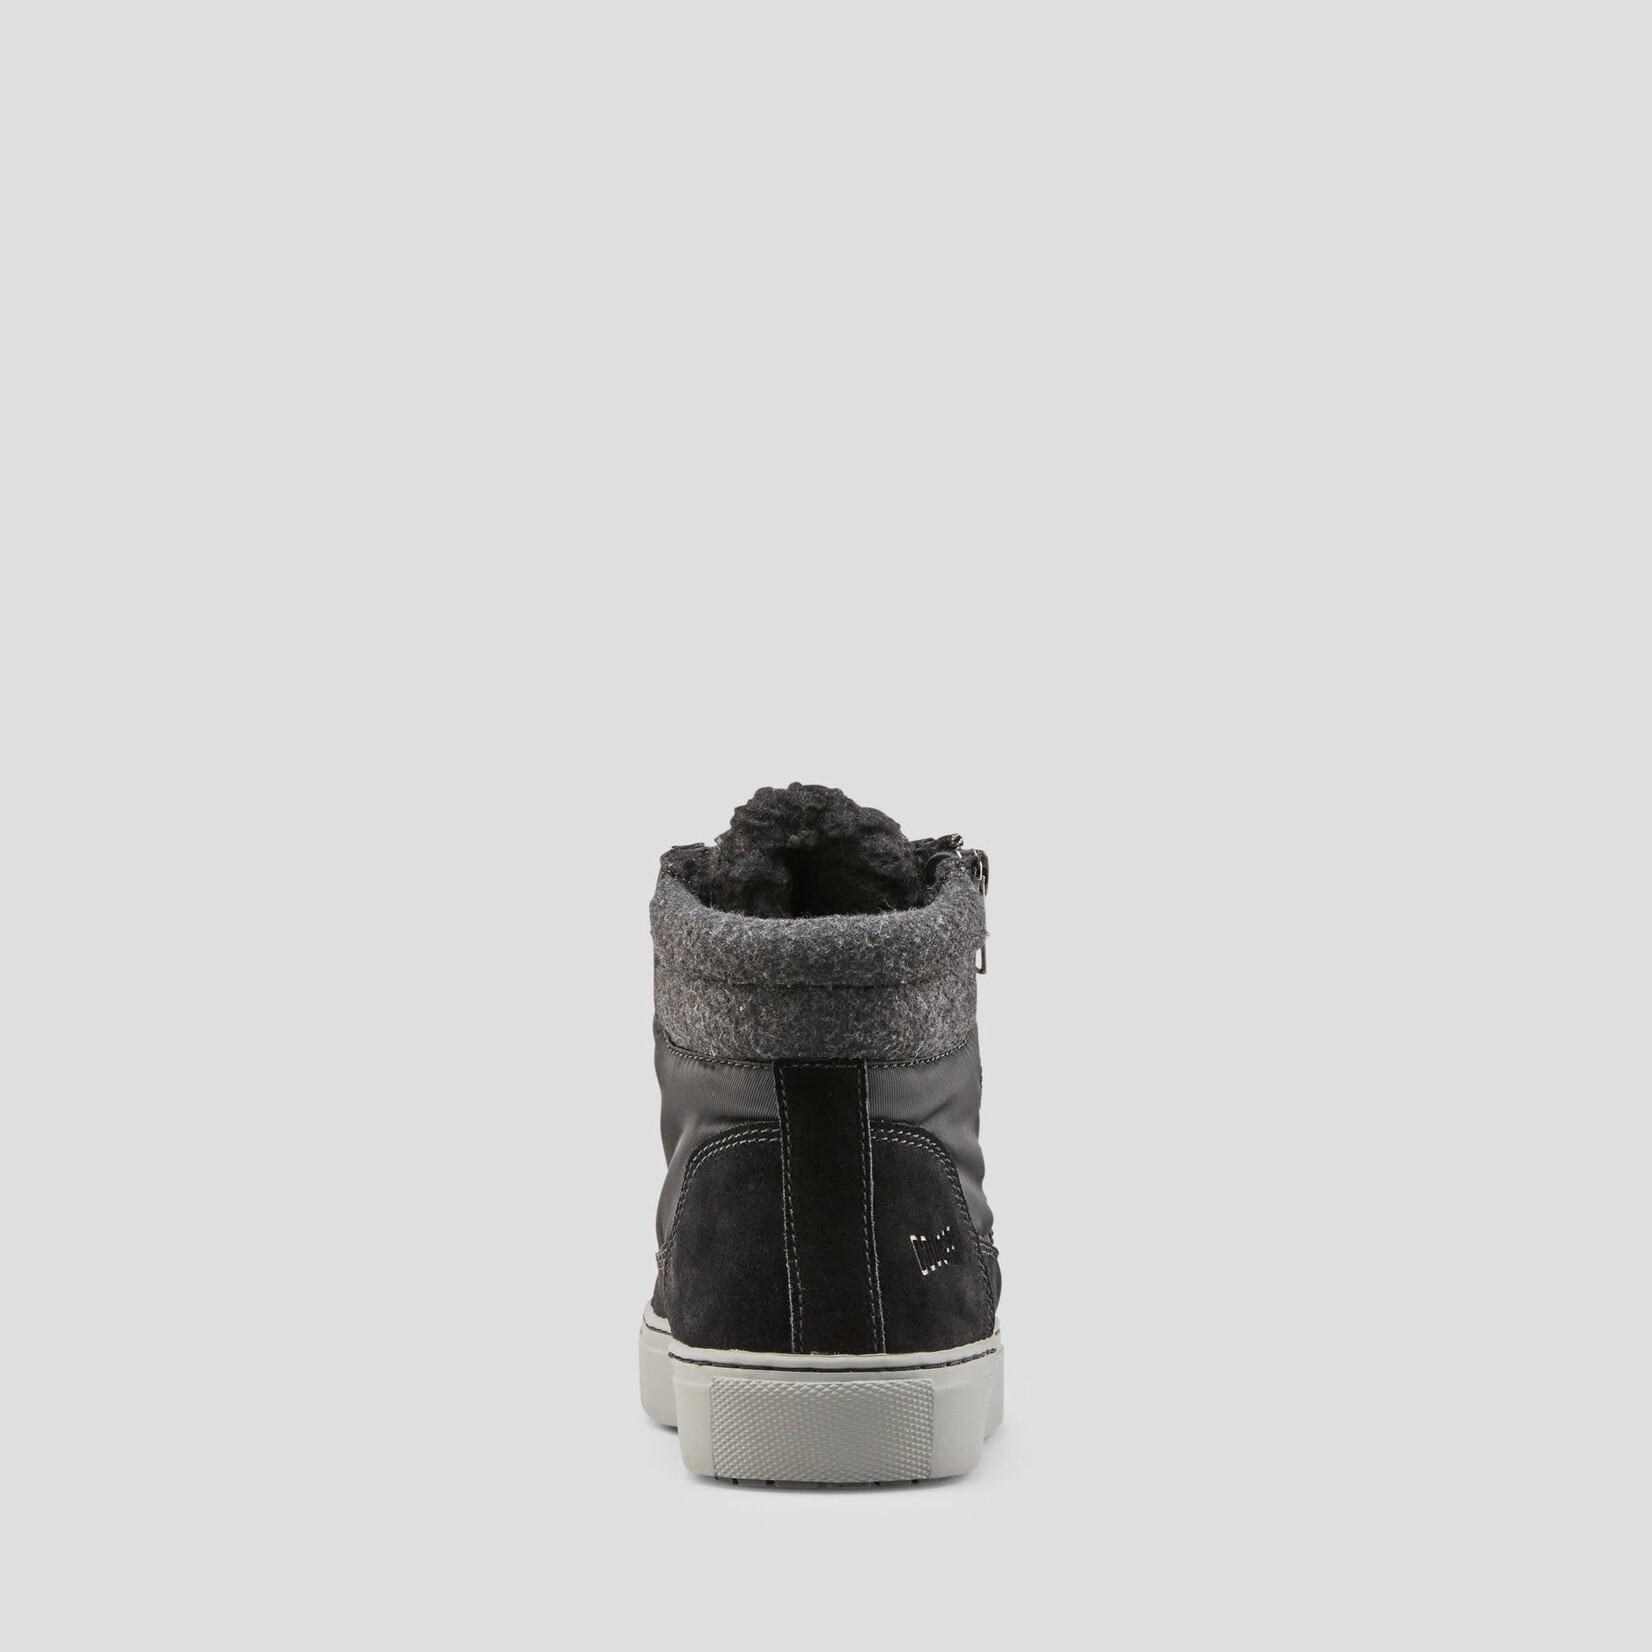 Cougar Dax Waterproof Nylon and Suede  Sneaker in Black by Cougar